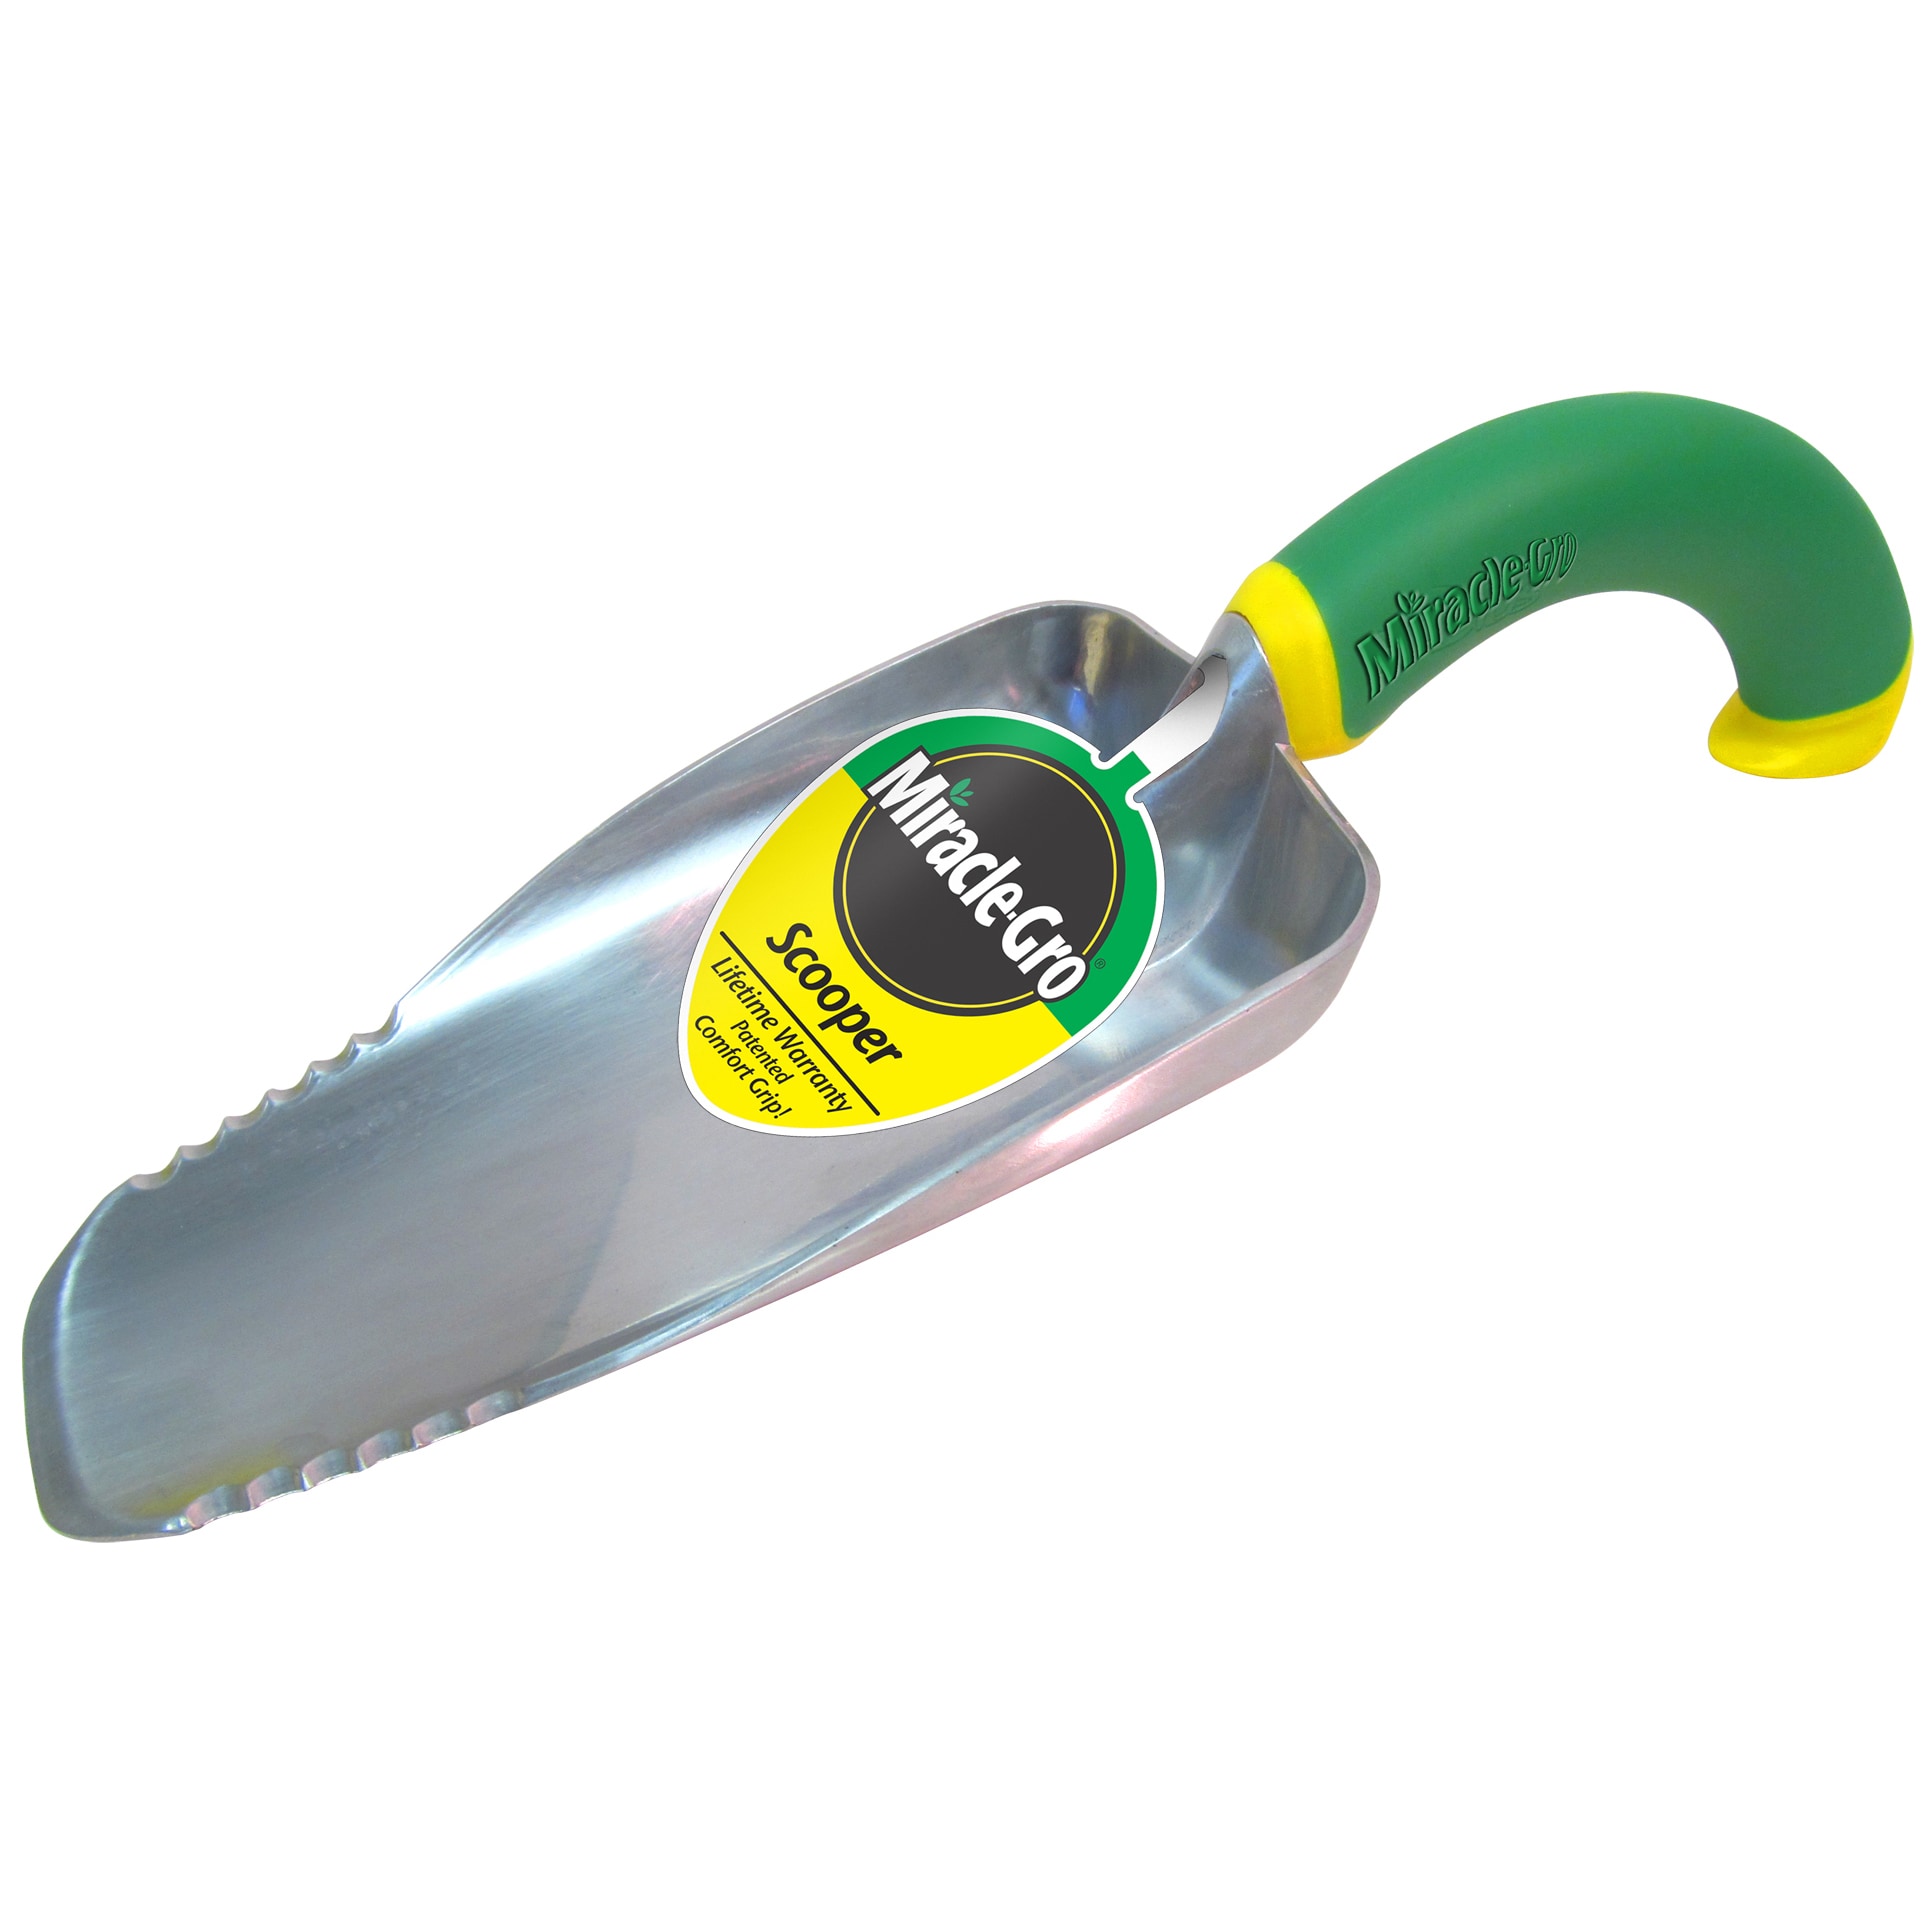 How Shop Radius Garden 106-mg Miracle Gro Scooper ... can Save You Time, Stress, and Money.